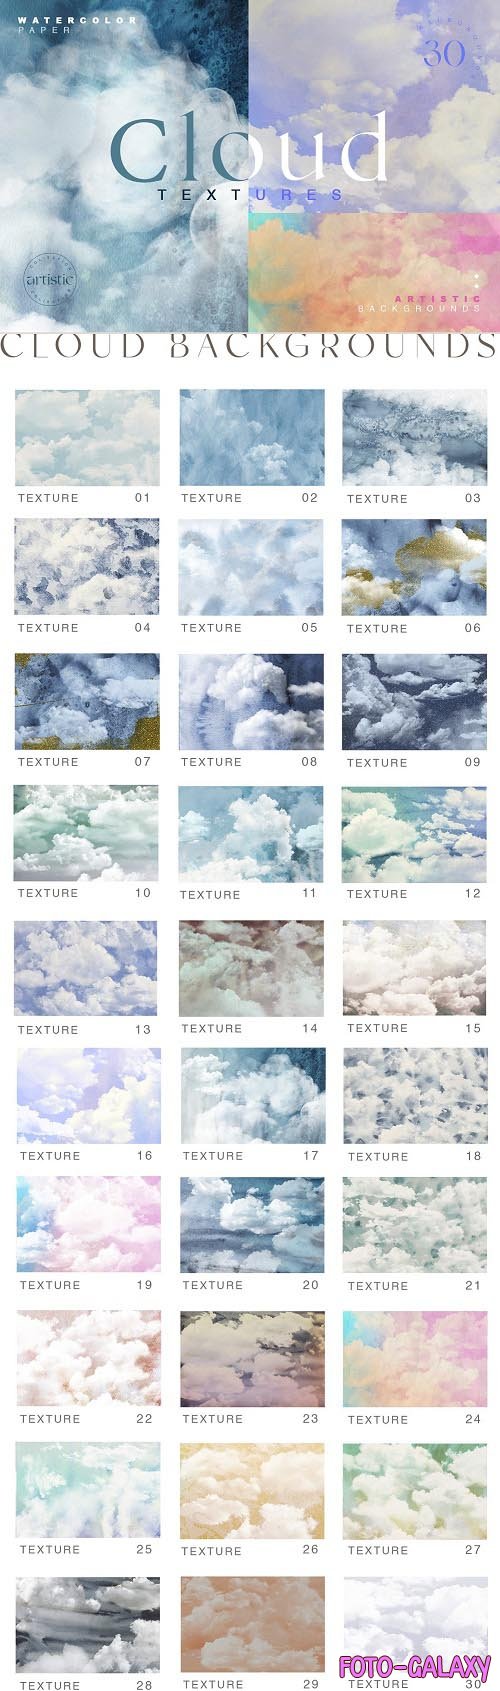 Cloudy Watercolor Abstract Textures - 6561479